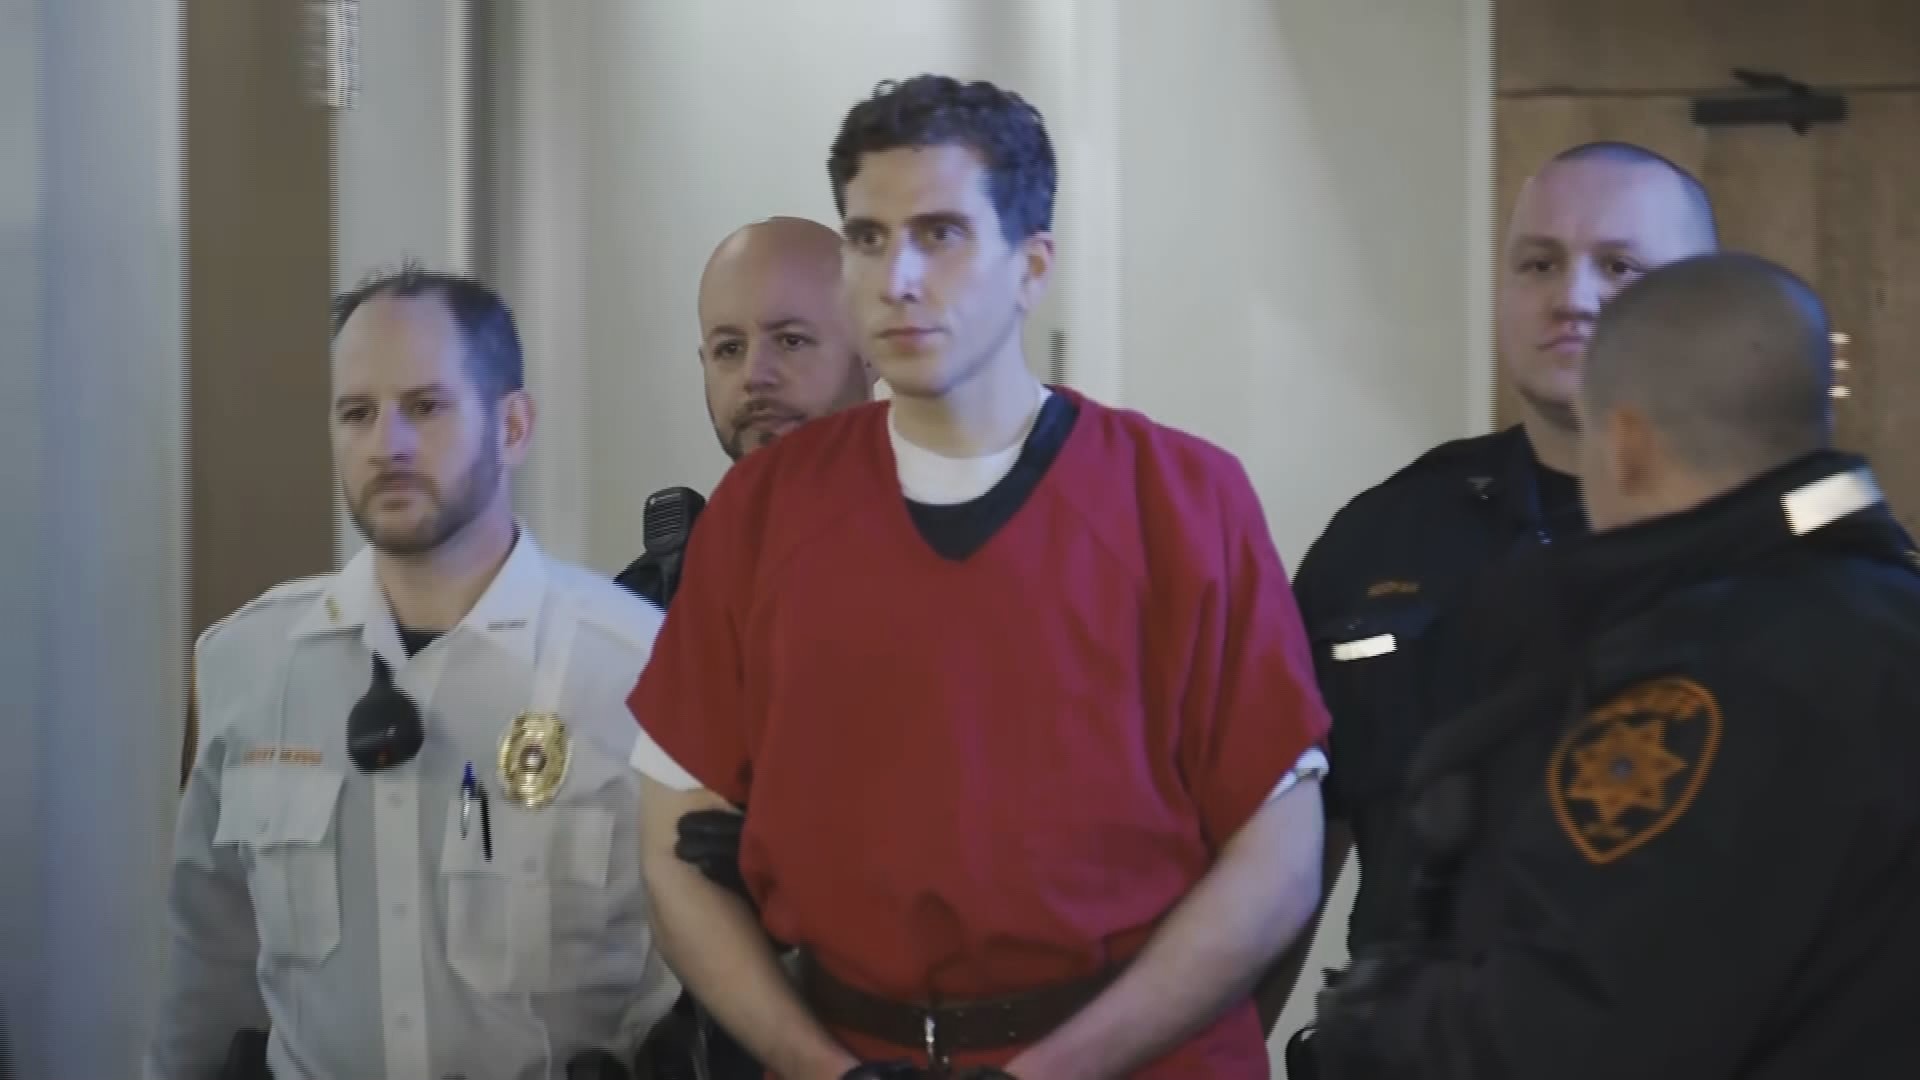 Bryan Kohberger entered a Pennsylvania courtroom on Tuesday for an extradition hearing. Kohberger is suspected of killing four University of Idaho students in Moscow